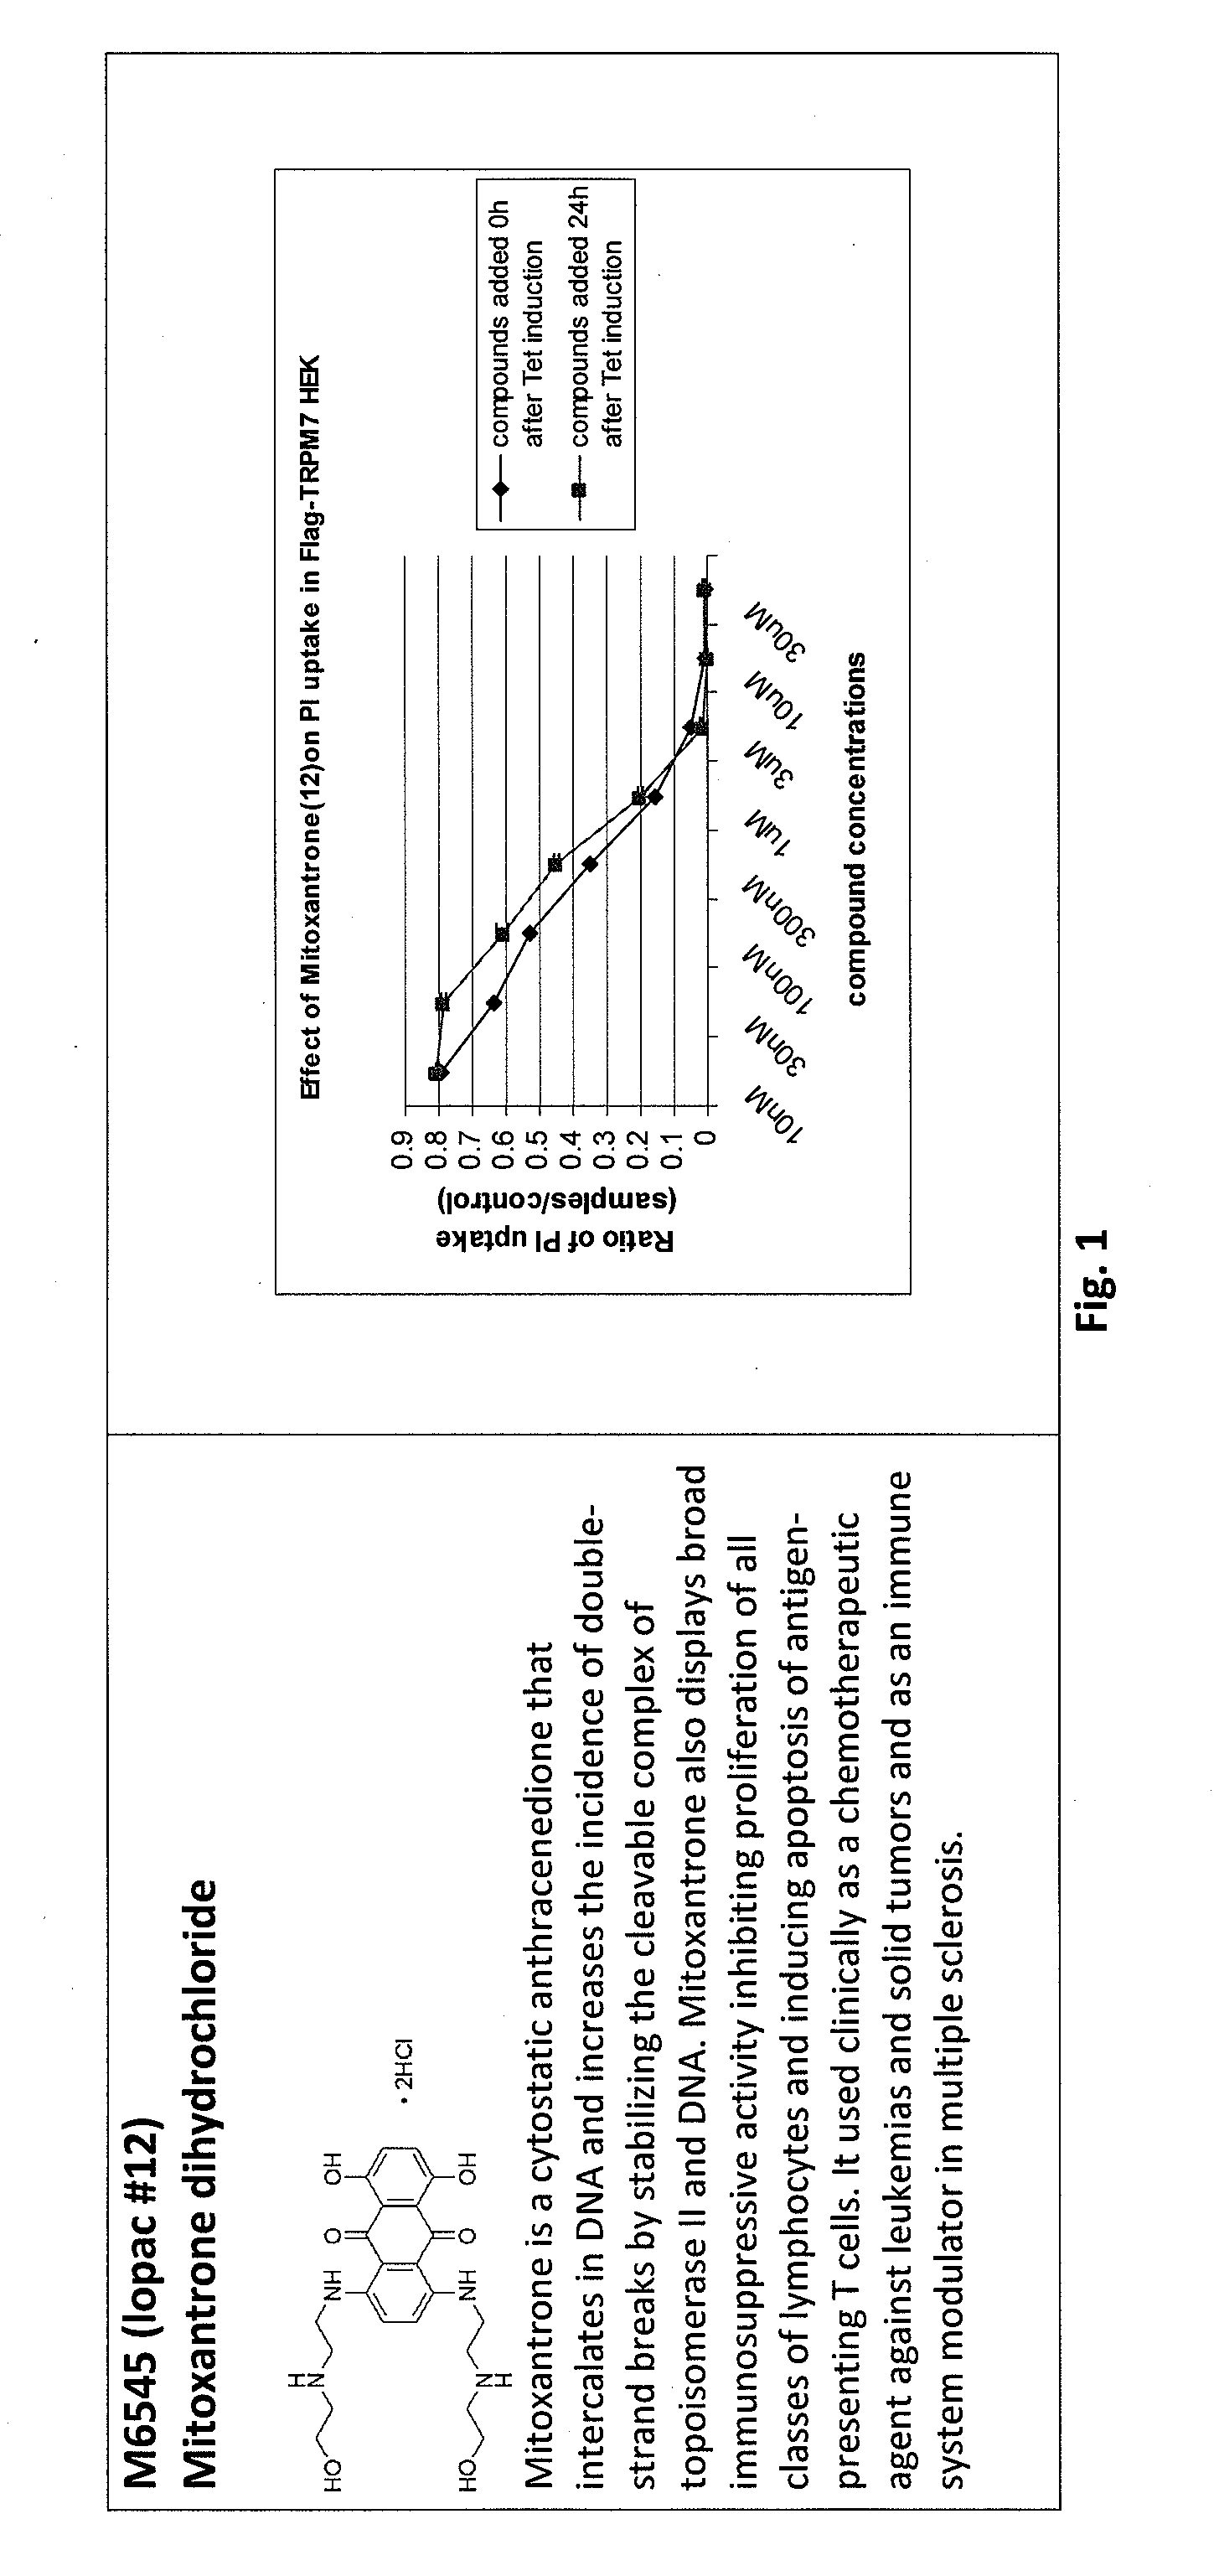 Agents and methods for treating ischemic and other diseases